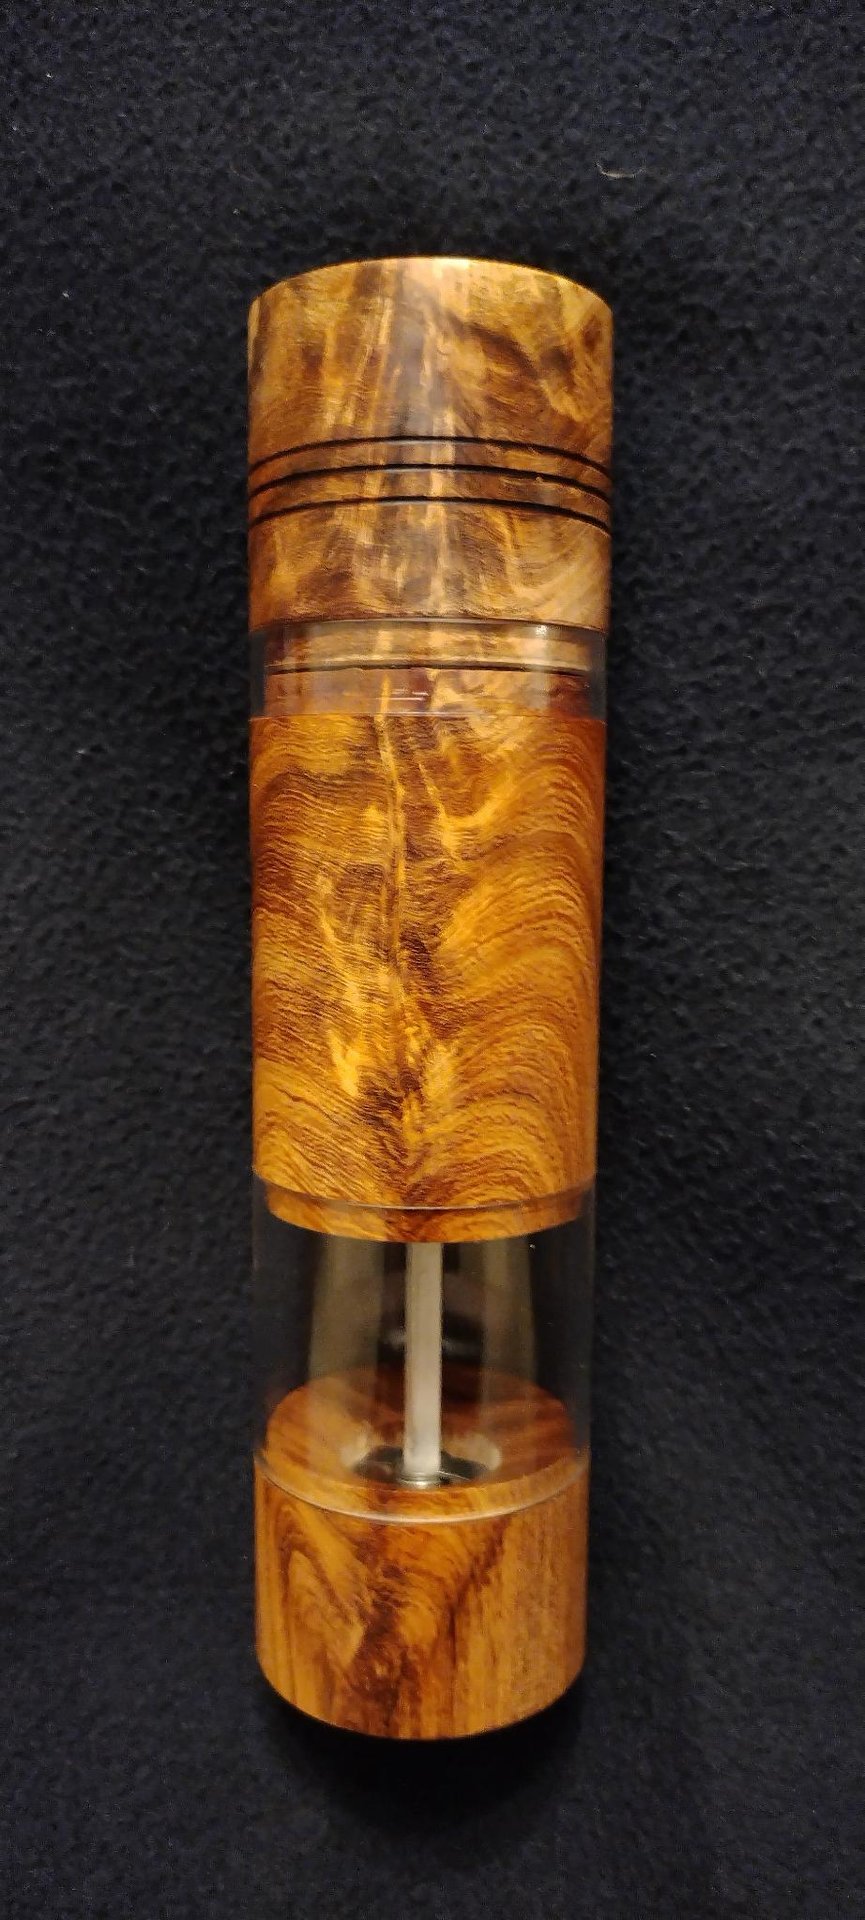 Feather crotch mesquite pepper grinder